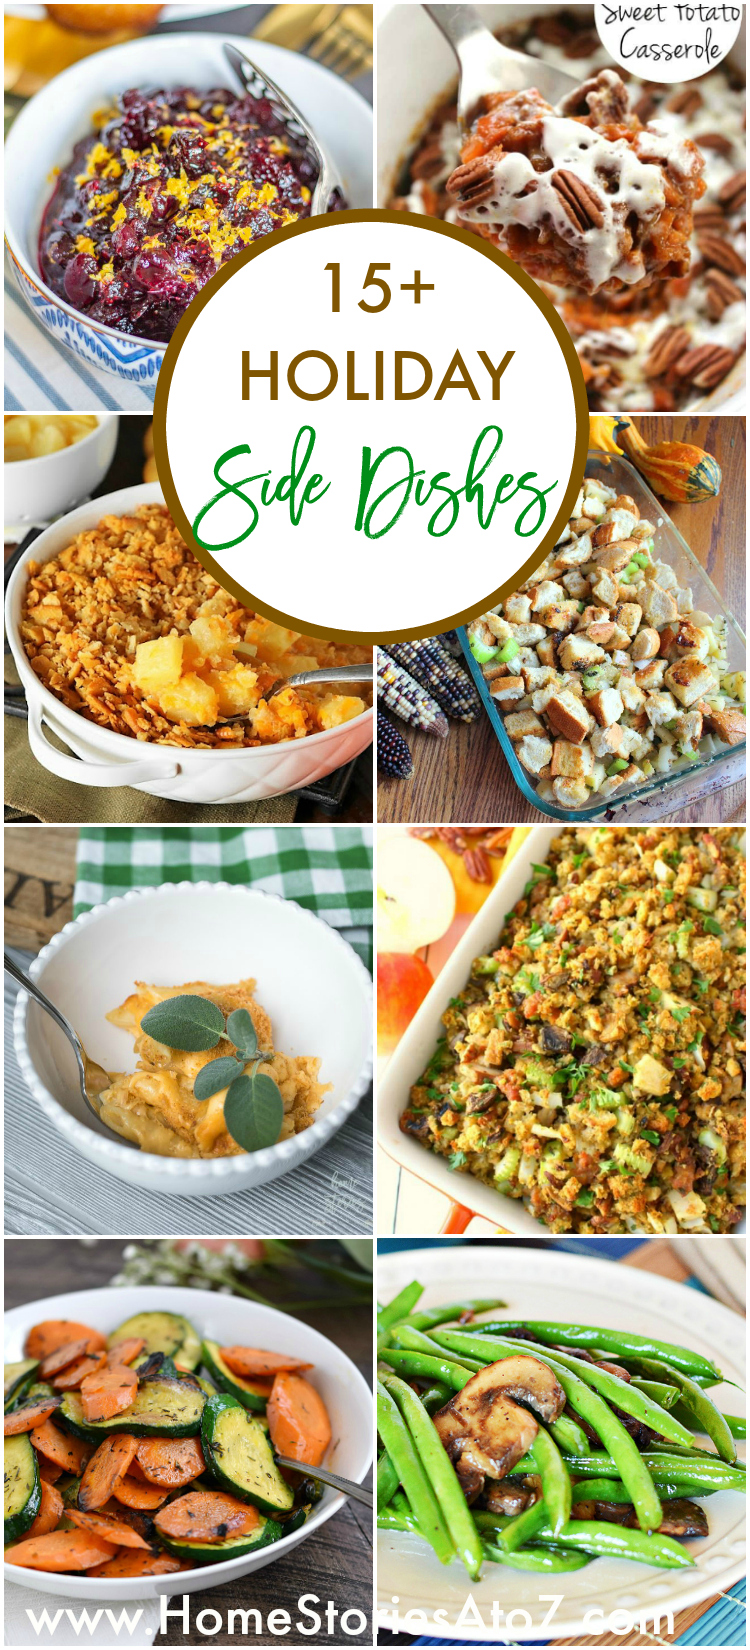 15+ Holiday Side Dishes - Home Stories A to Z